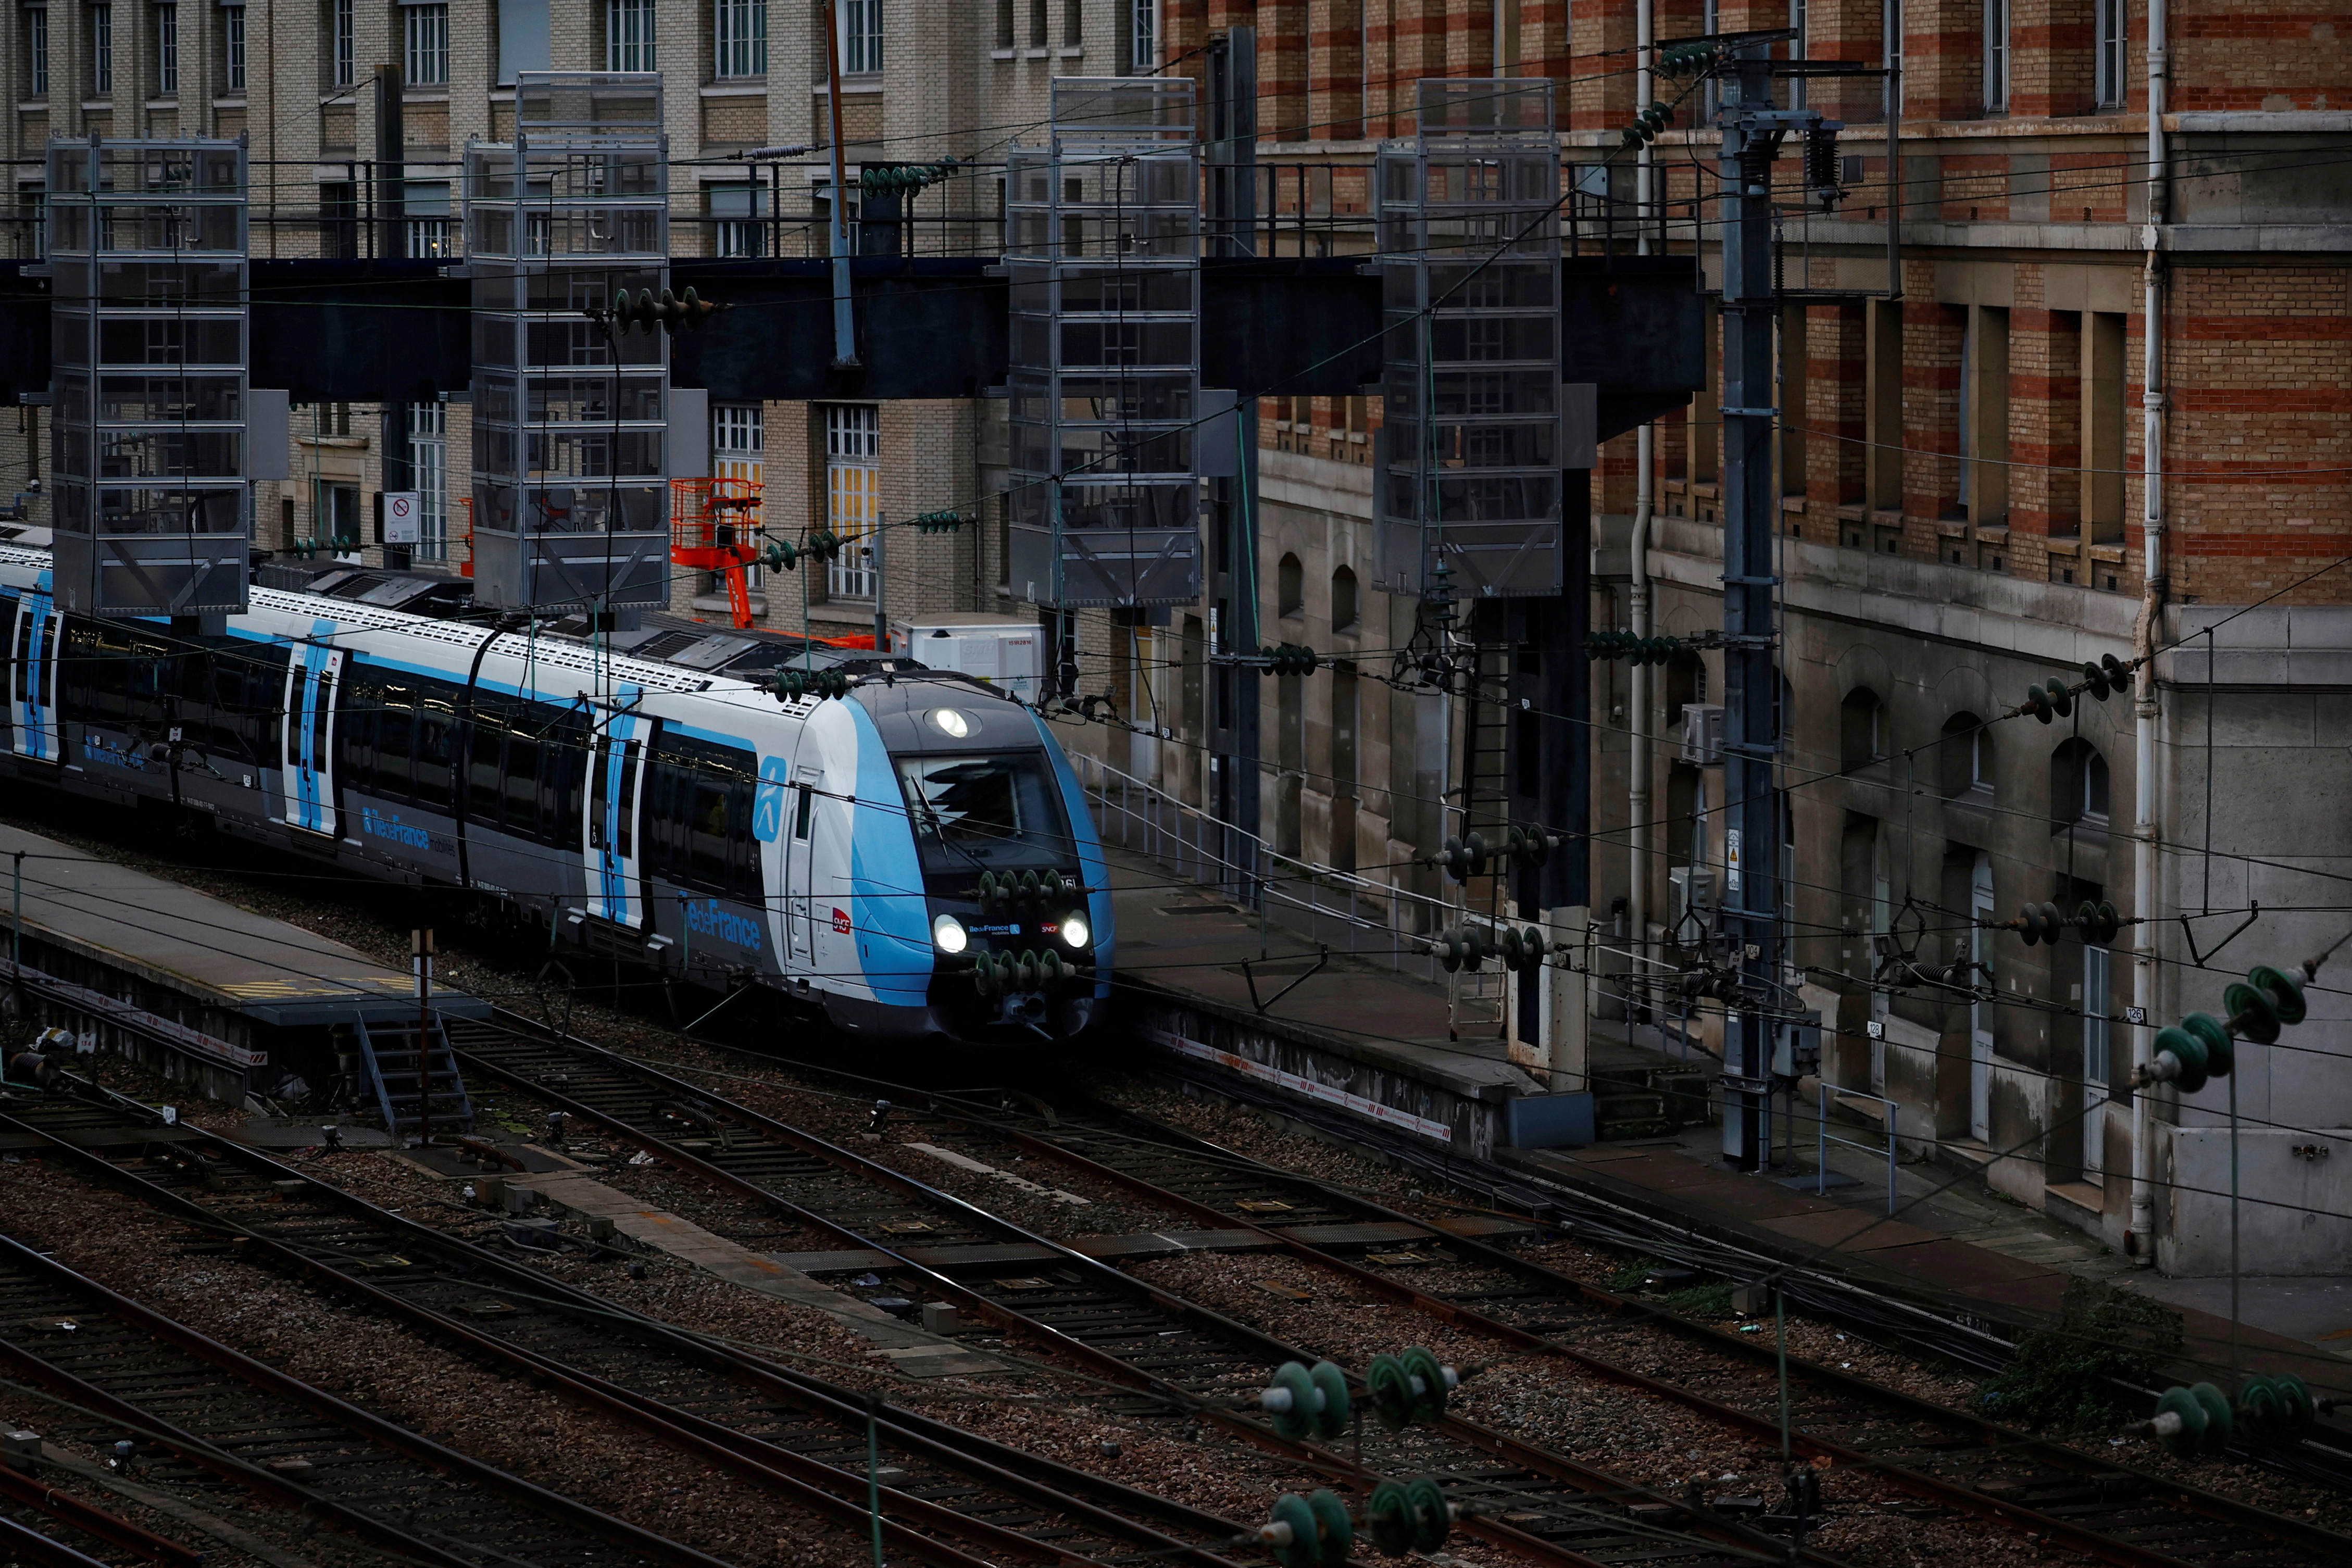 A SNCF Express Regional train at the Saint-Lazare train station in Paris